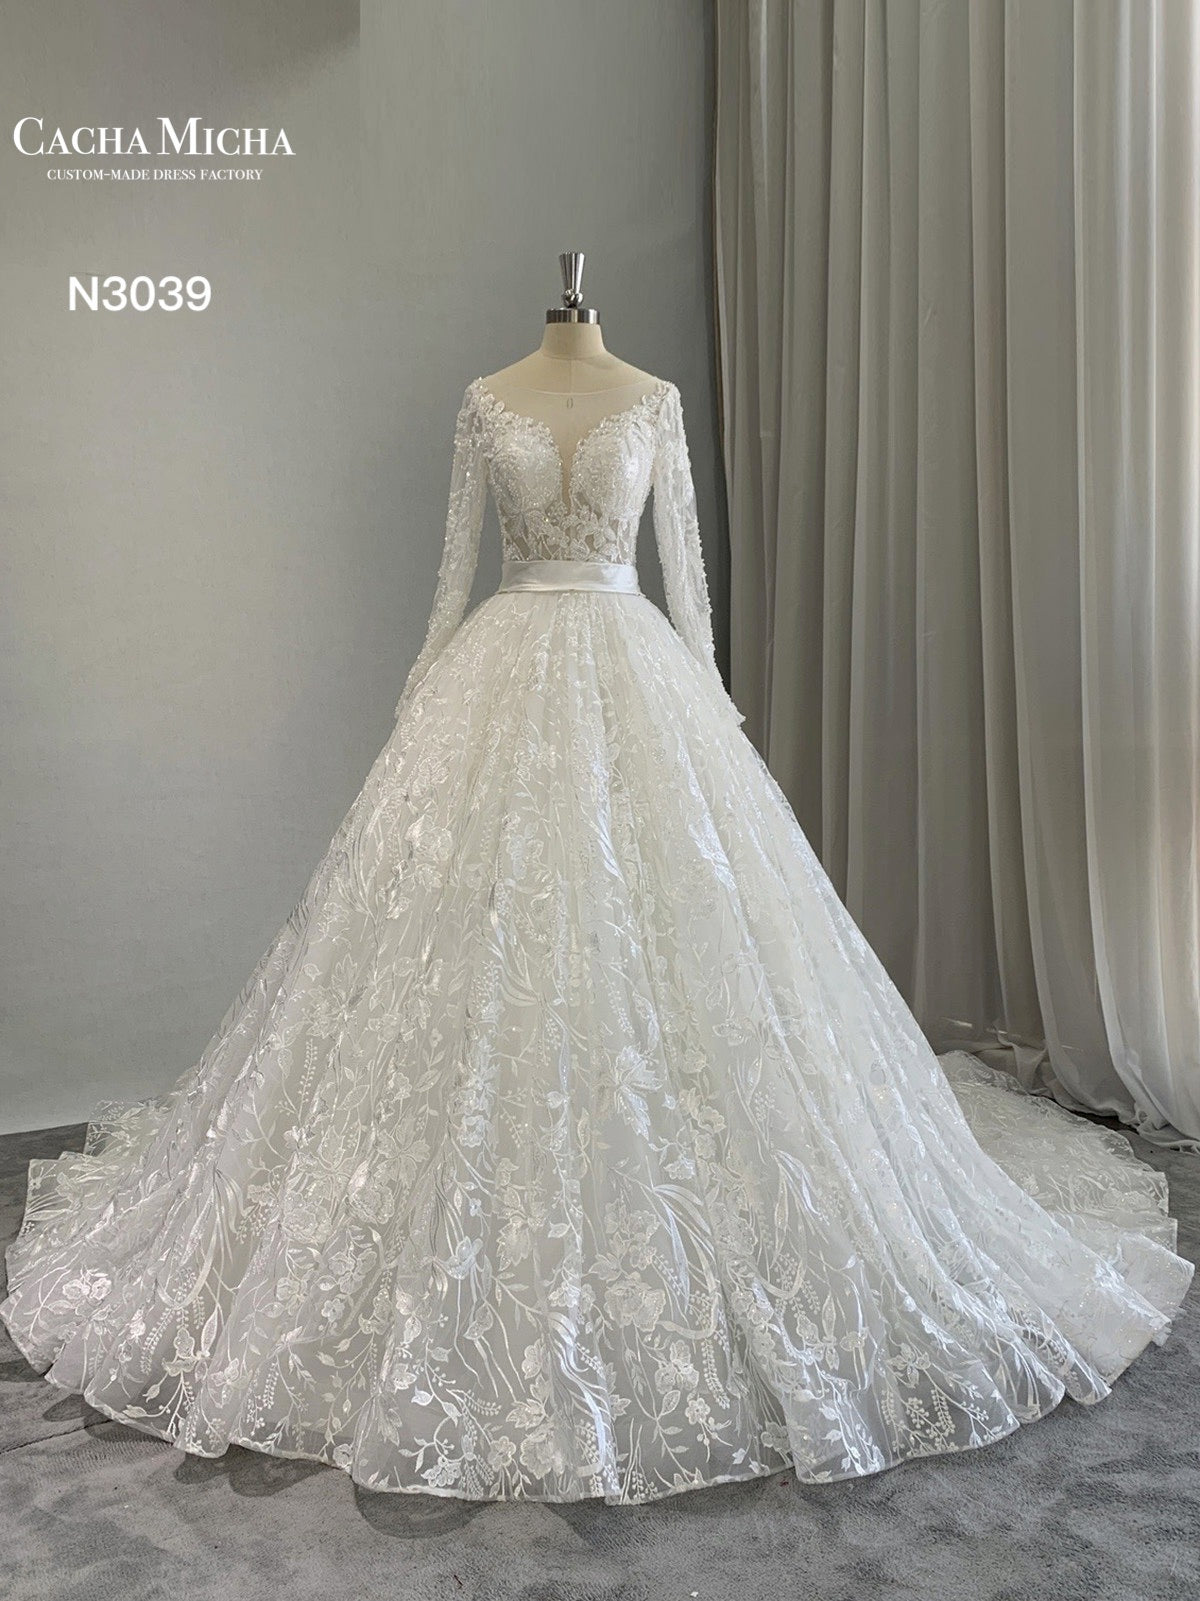 Heavy Beaded Lace Ball Gown Wedding Dress N3039